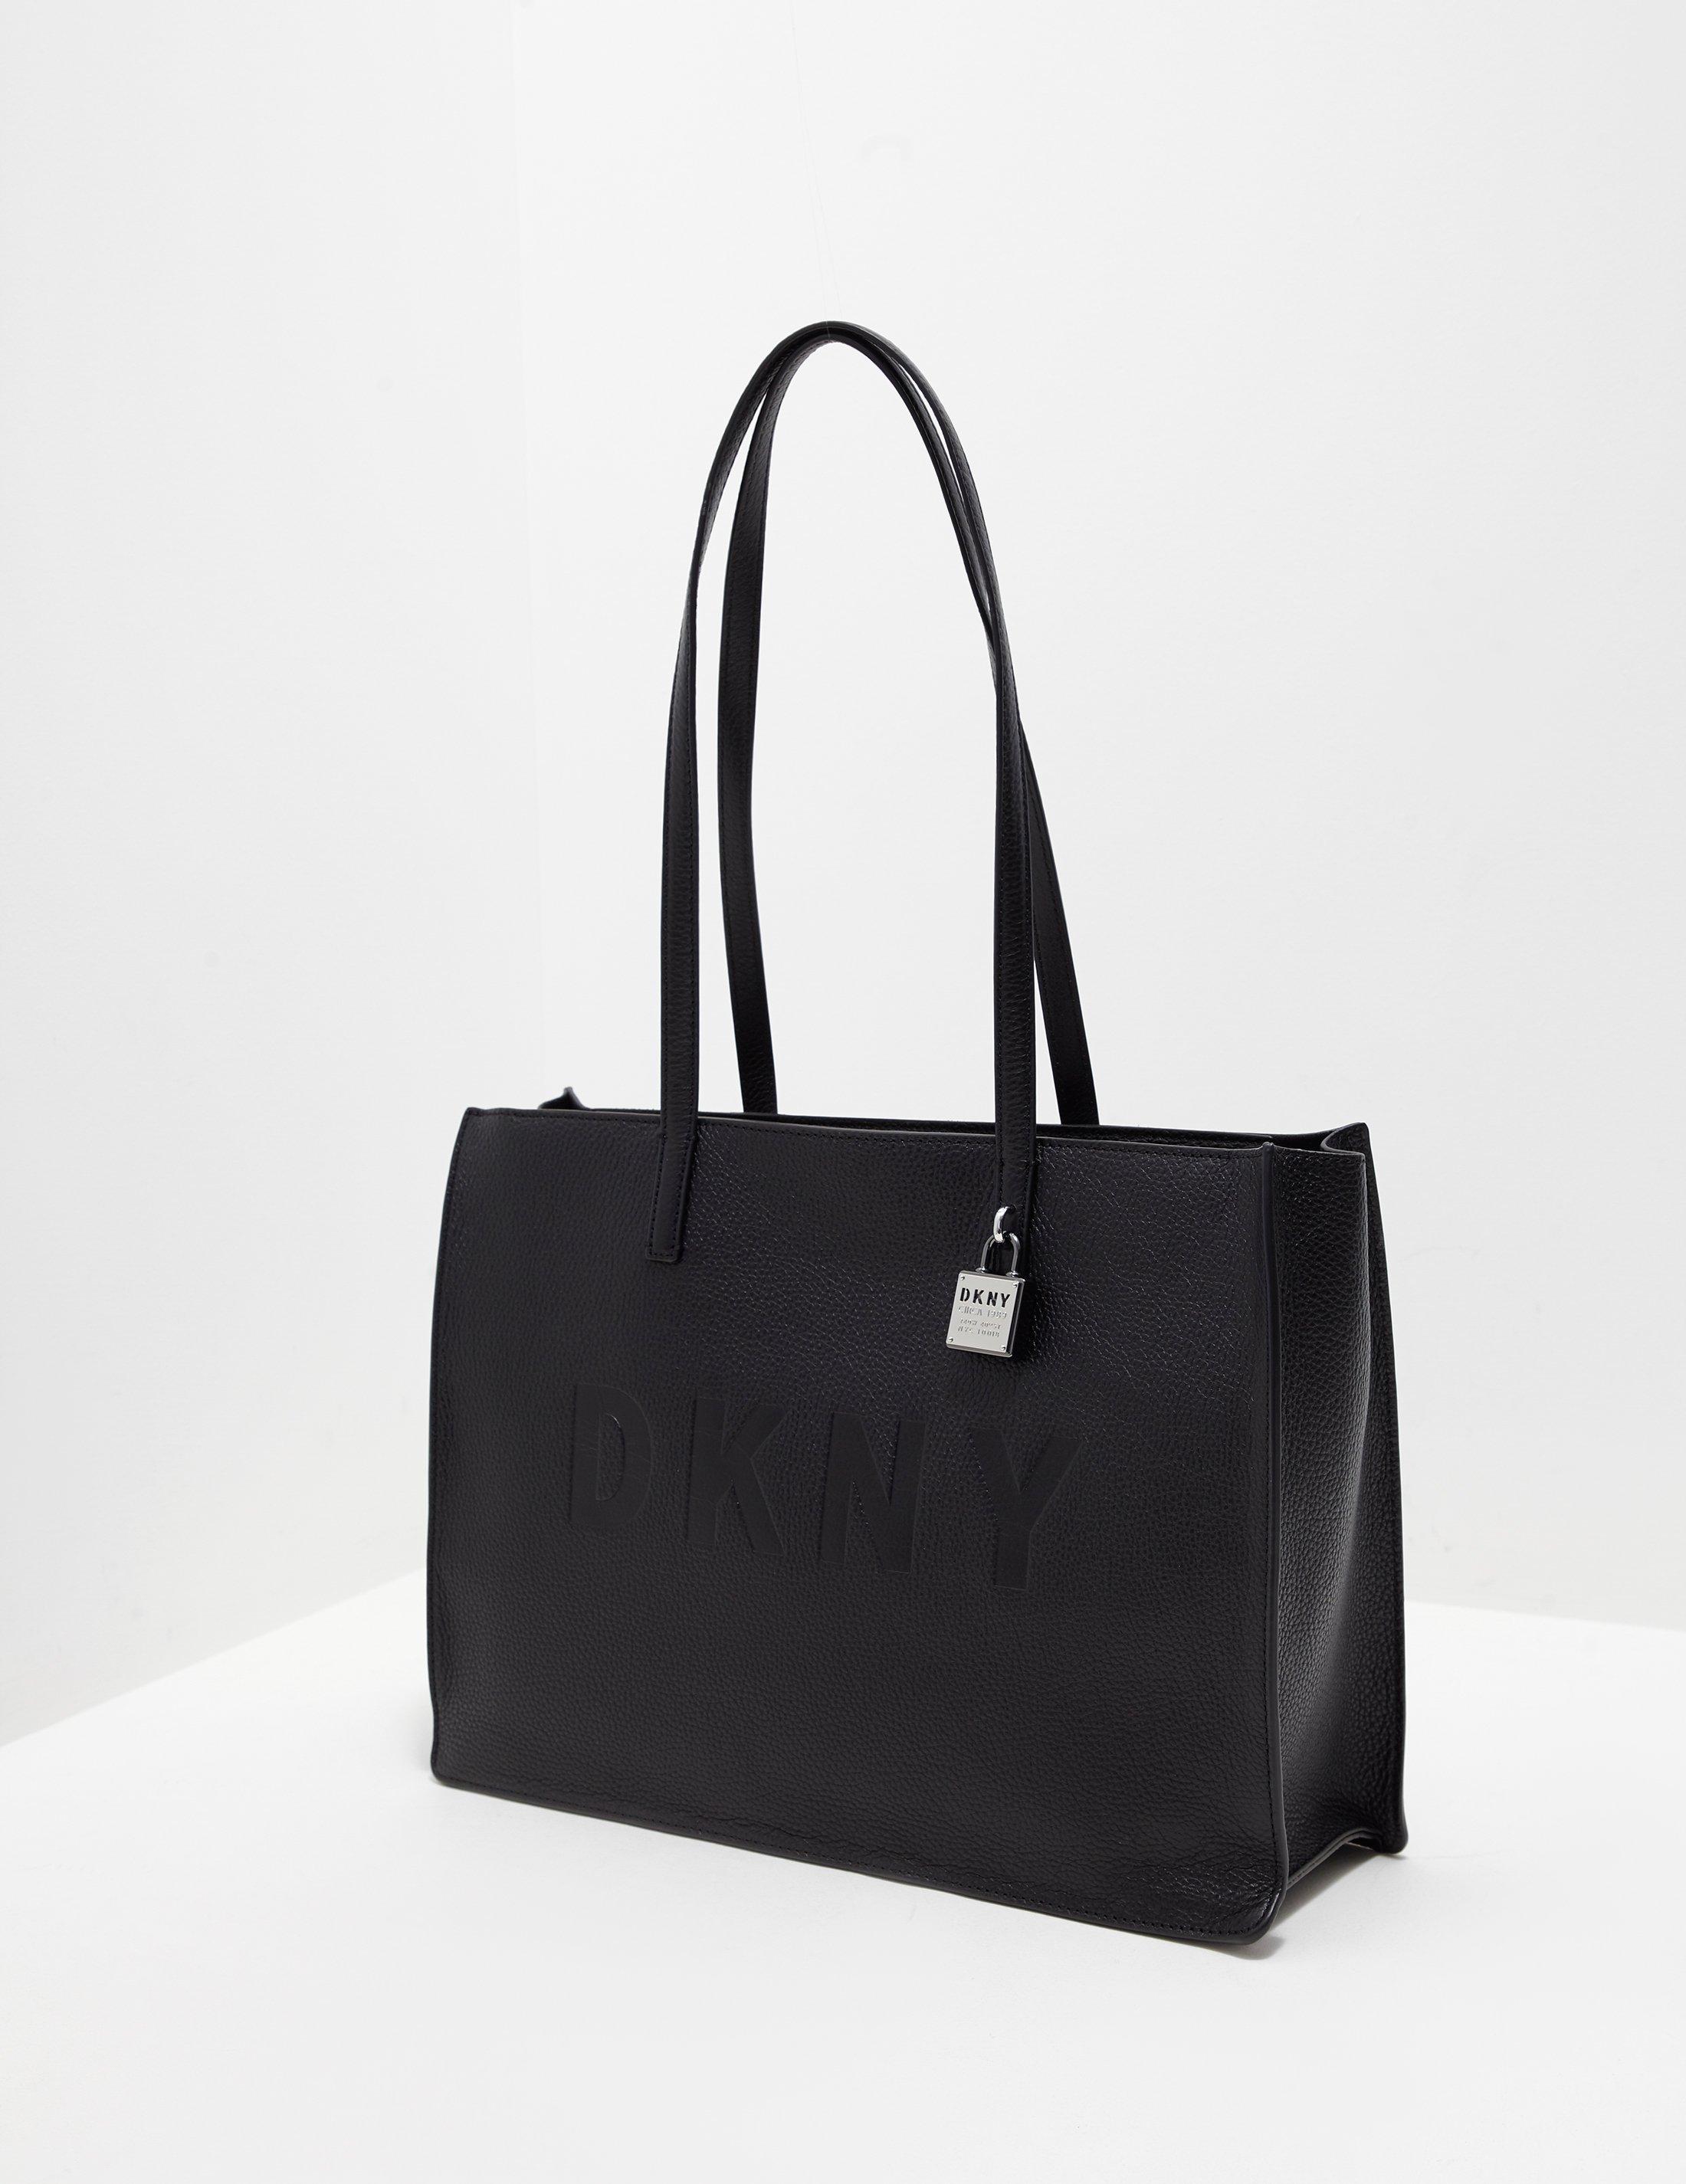 DKNY Leather Commuter Tote Bag Black - Lyst